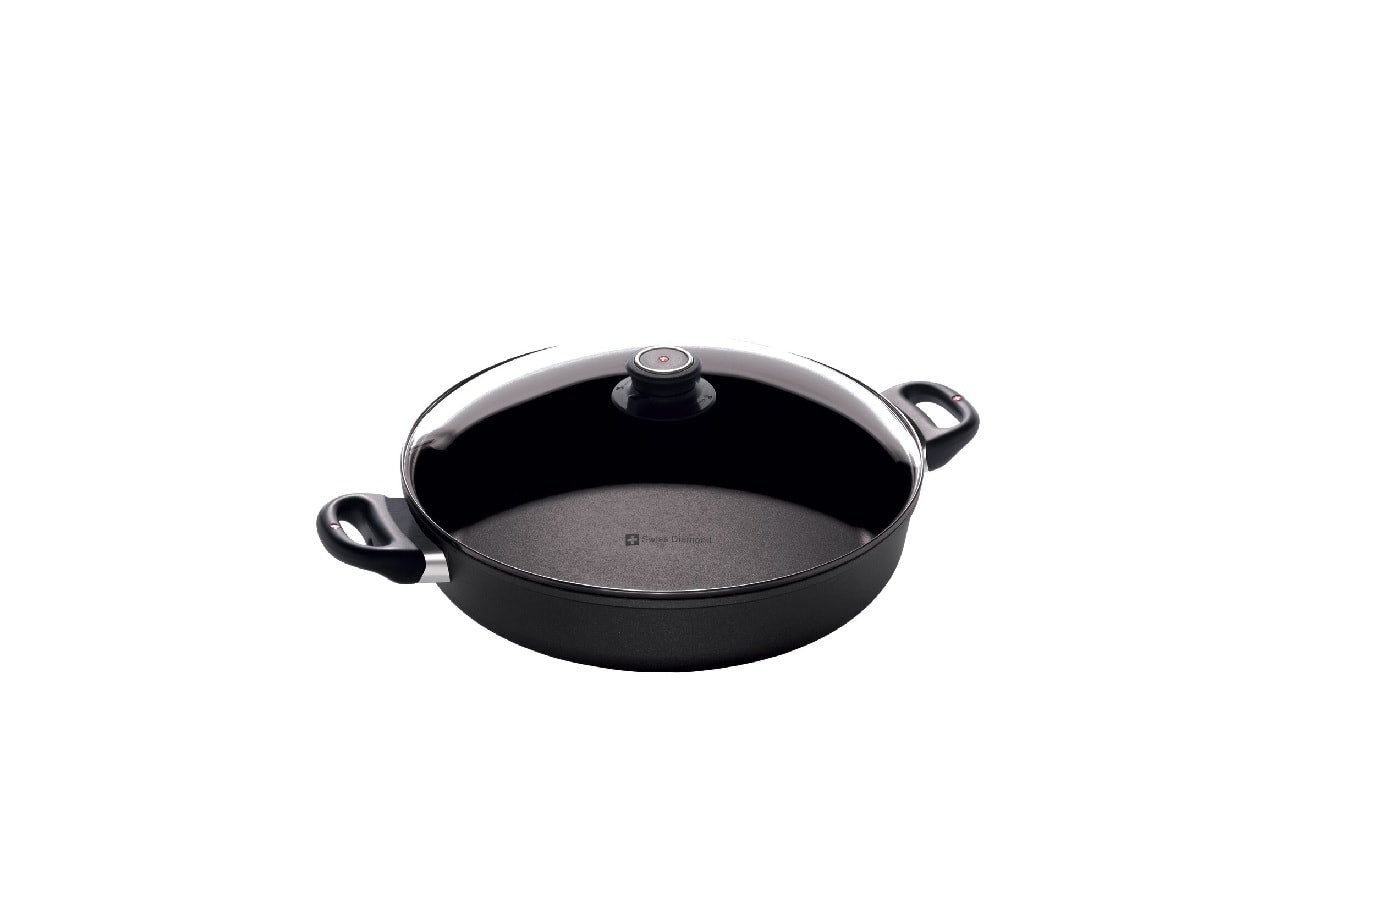 Swiss Diamond XD Nonstick 12.5'' Sauteuse with Lid - 4.8 Qt (IH or Non-IH option)